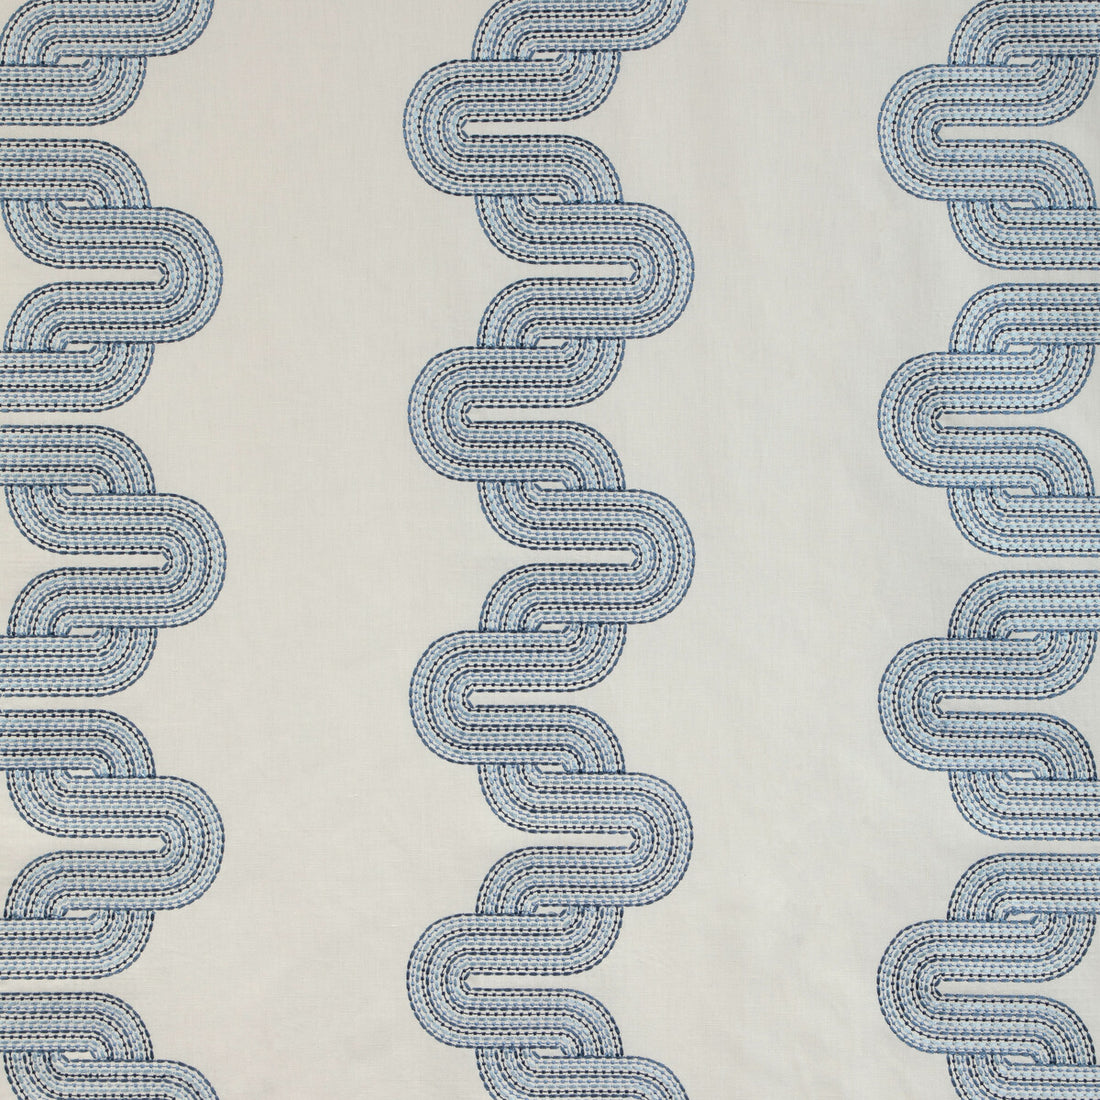 Cloud Chain fabric in indigo color - pattern 36943.5.0 - by Kravet Design in the Alexa Hampton collection